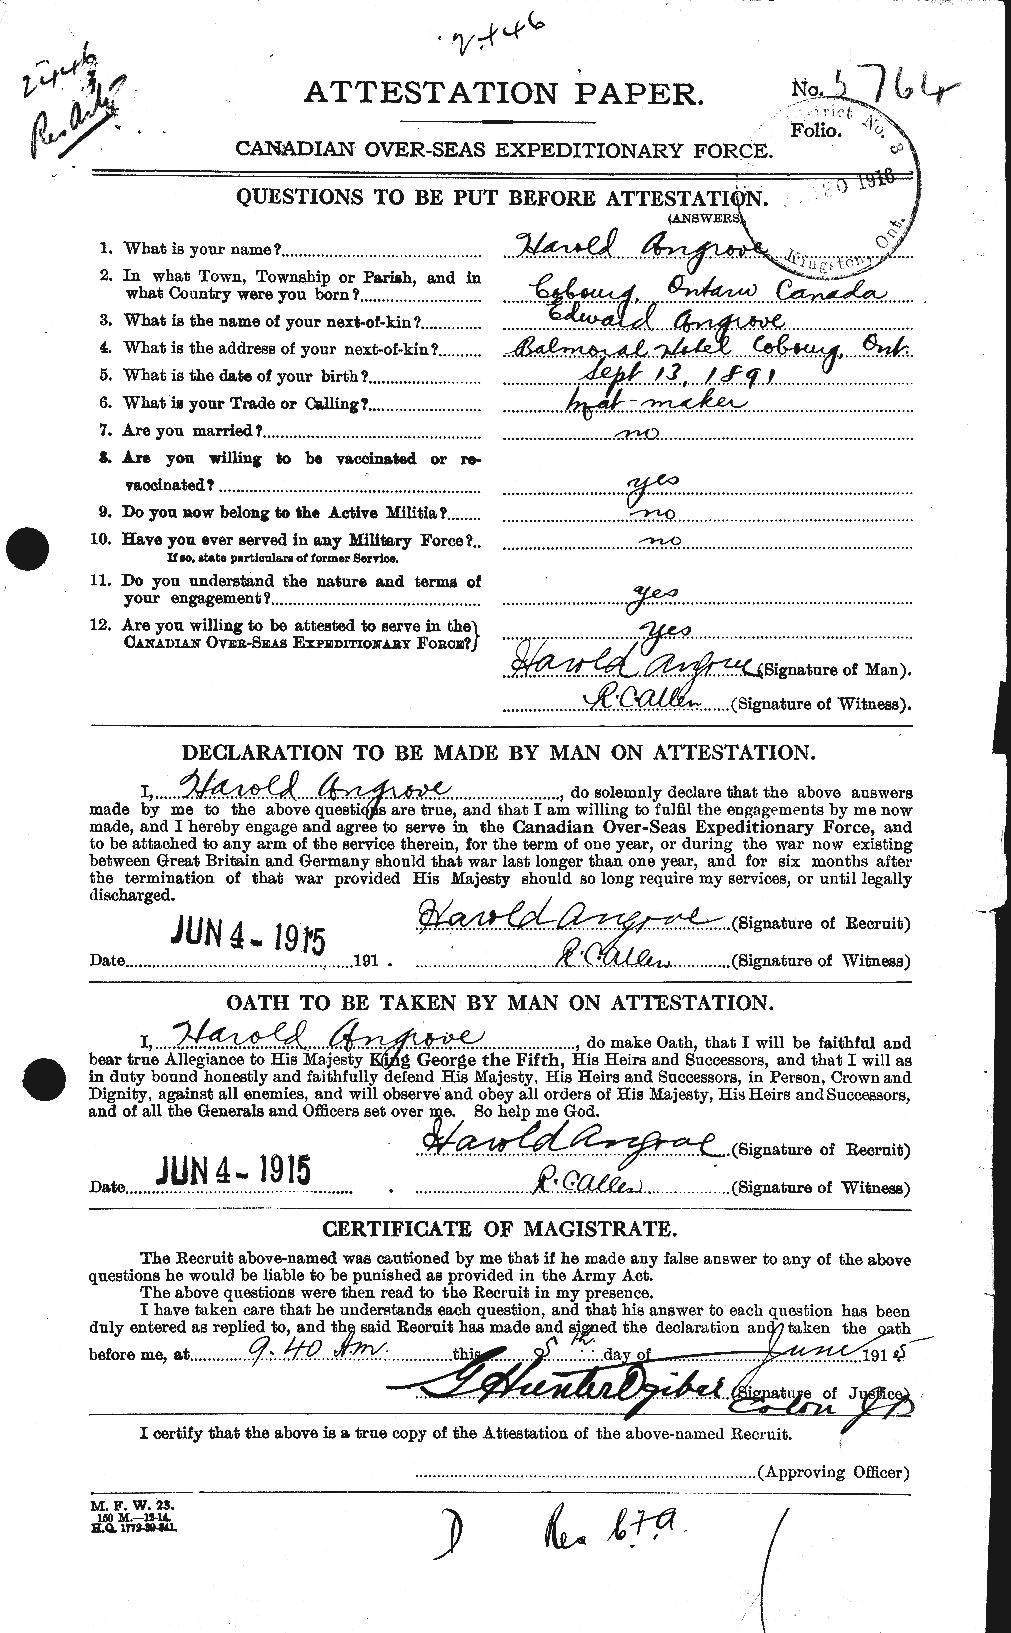 Personnel Records of the First World War - CEF 209129a